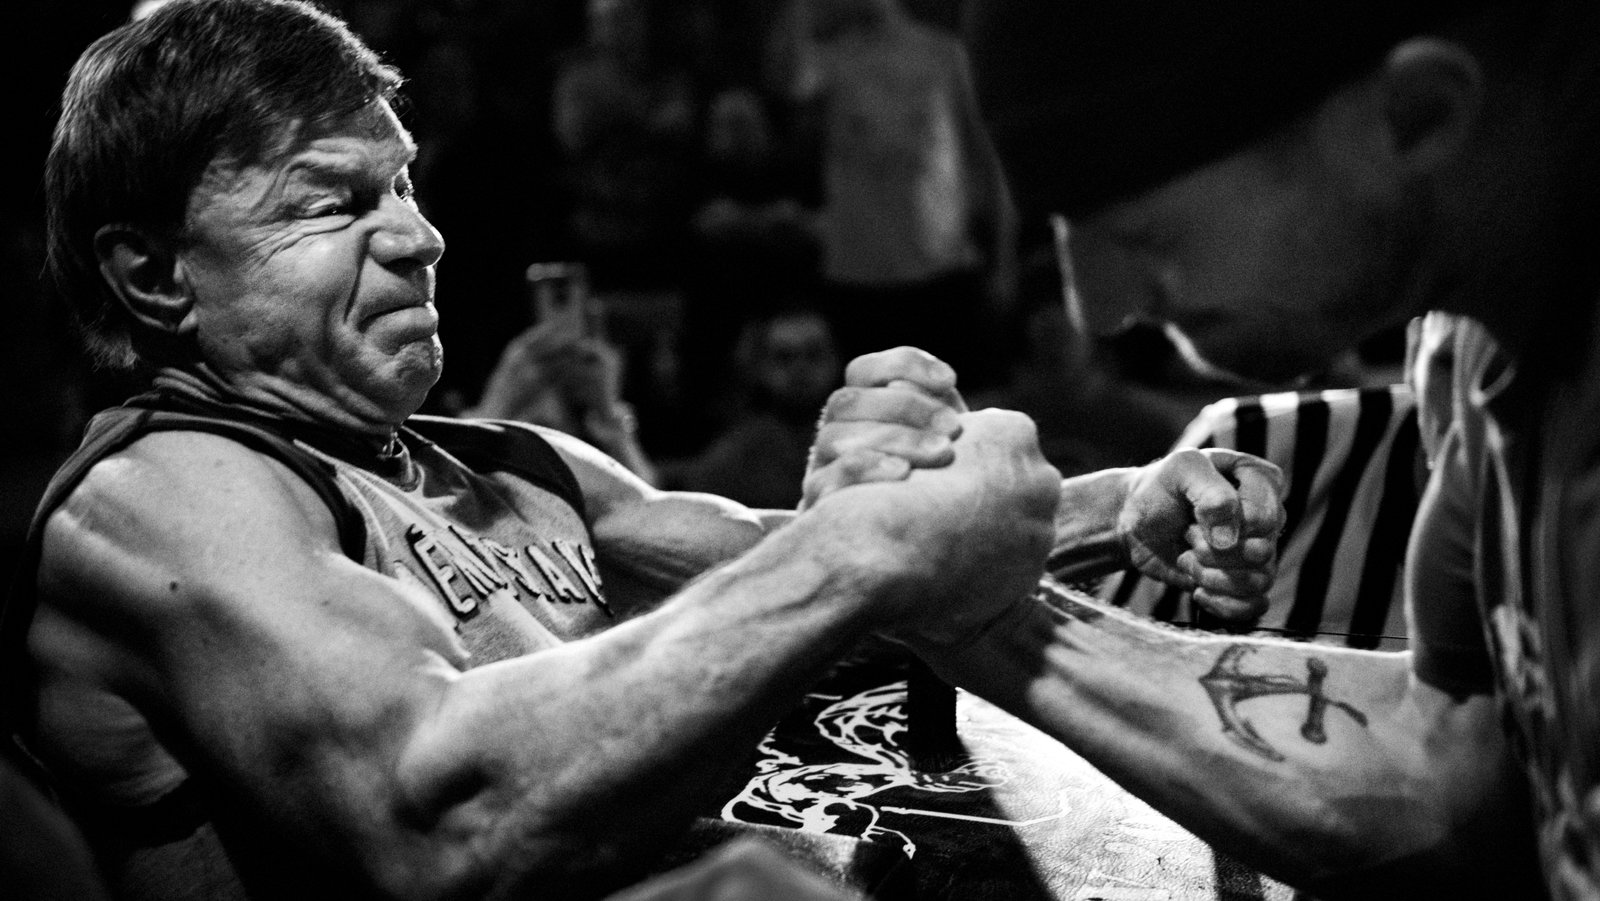 The 75 Year Old Arm Wrestler